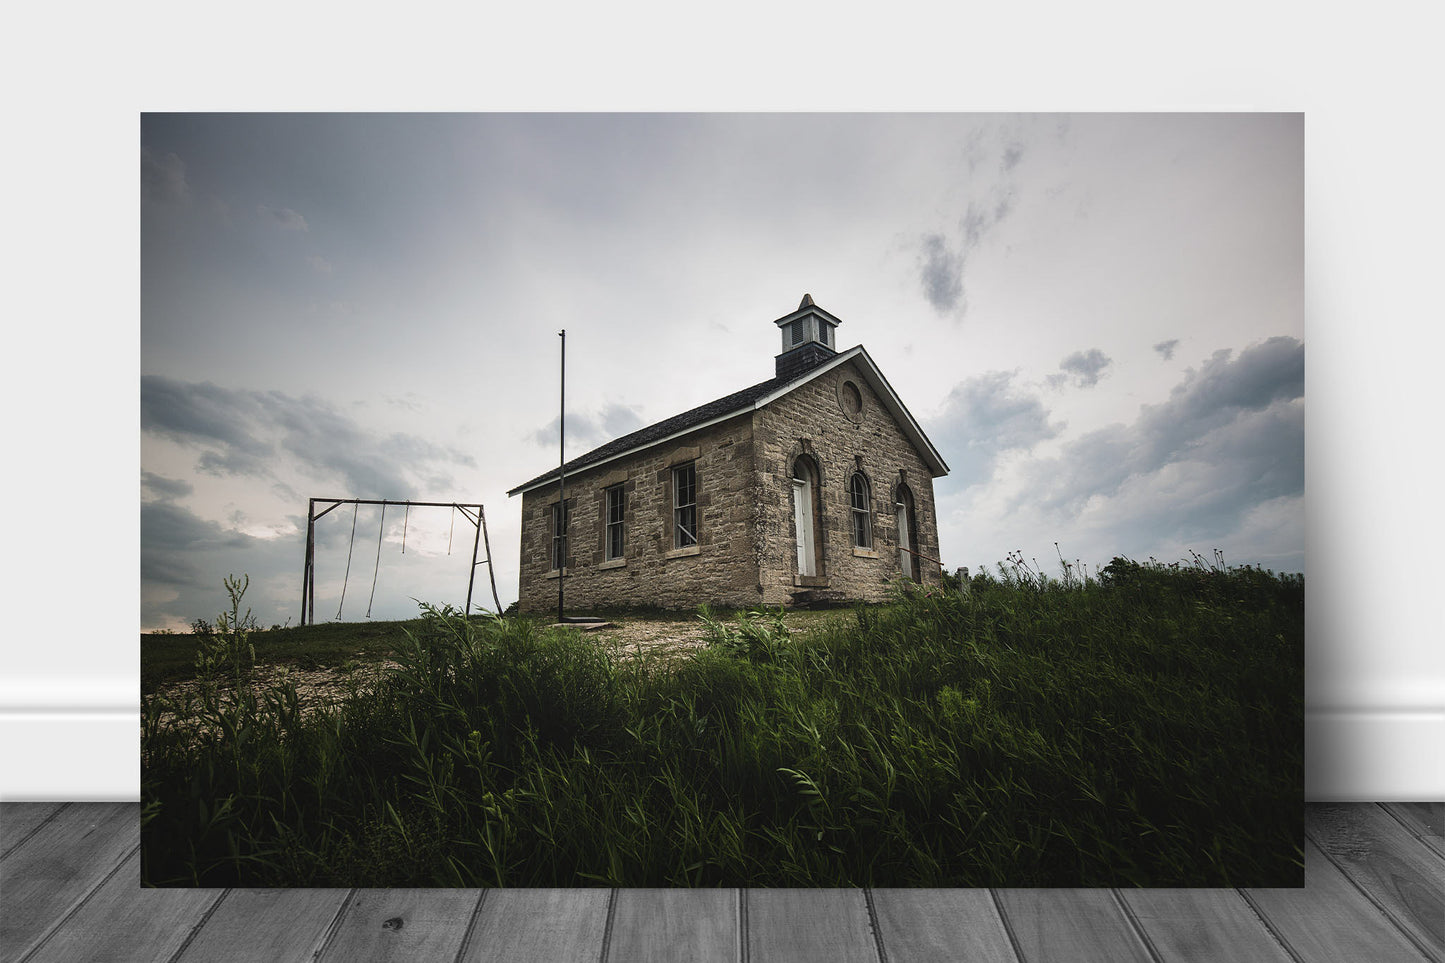 Abandoned metal print wall art of Lower Fox Creek School on a stormy summer day on the Tallgrass Prairie in the Flint Hills of Kansas by Sean Ramsey of Southern Plains Photography.